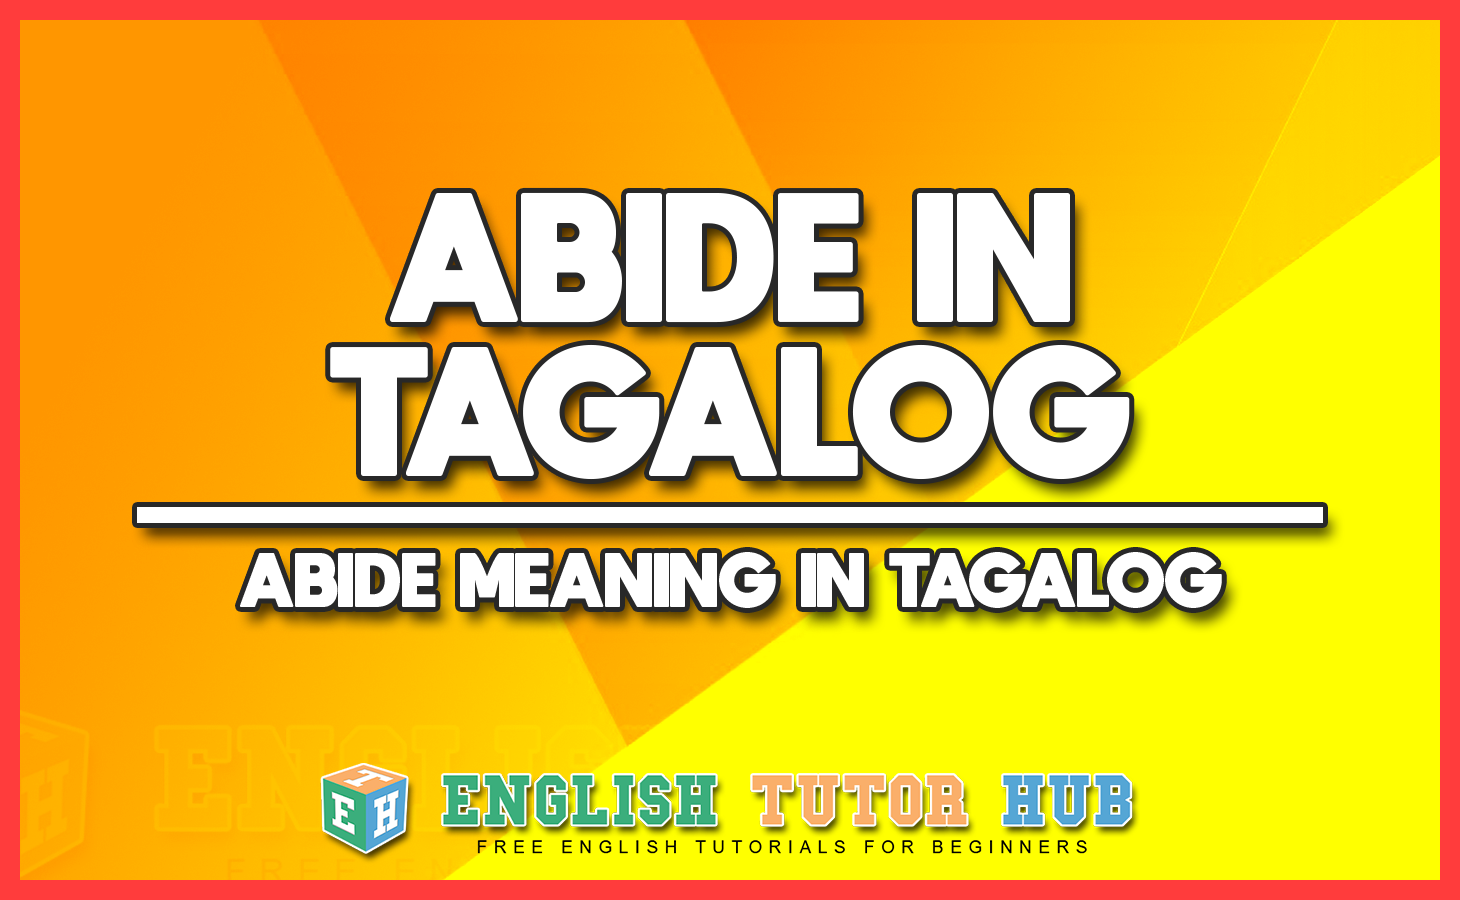 ABIDE IN TAGALOG - ABIDE MEANING IN TAGALOG